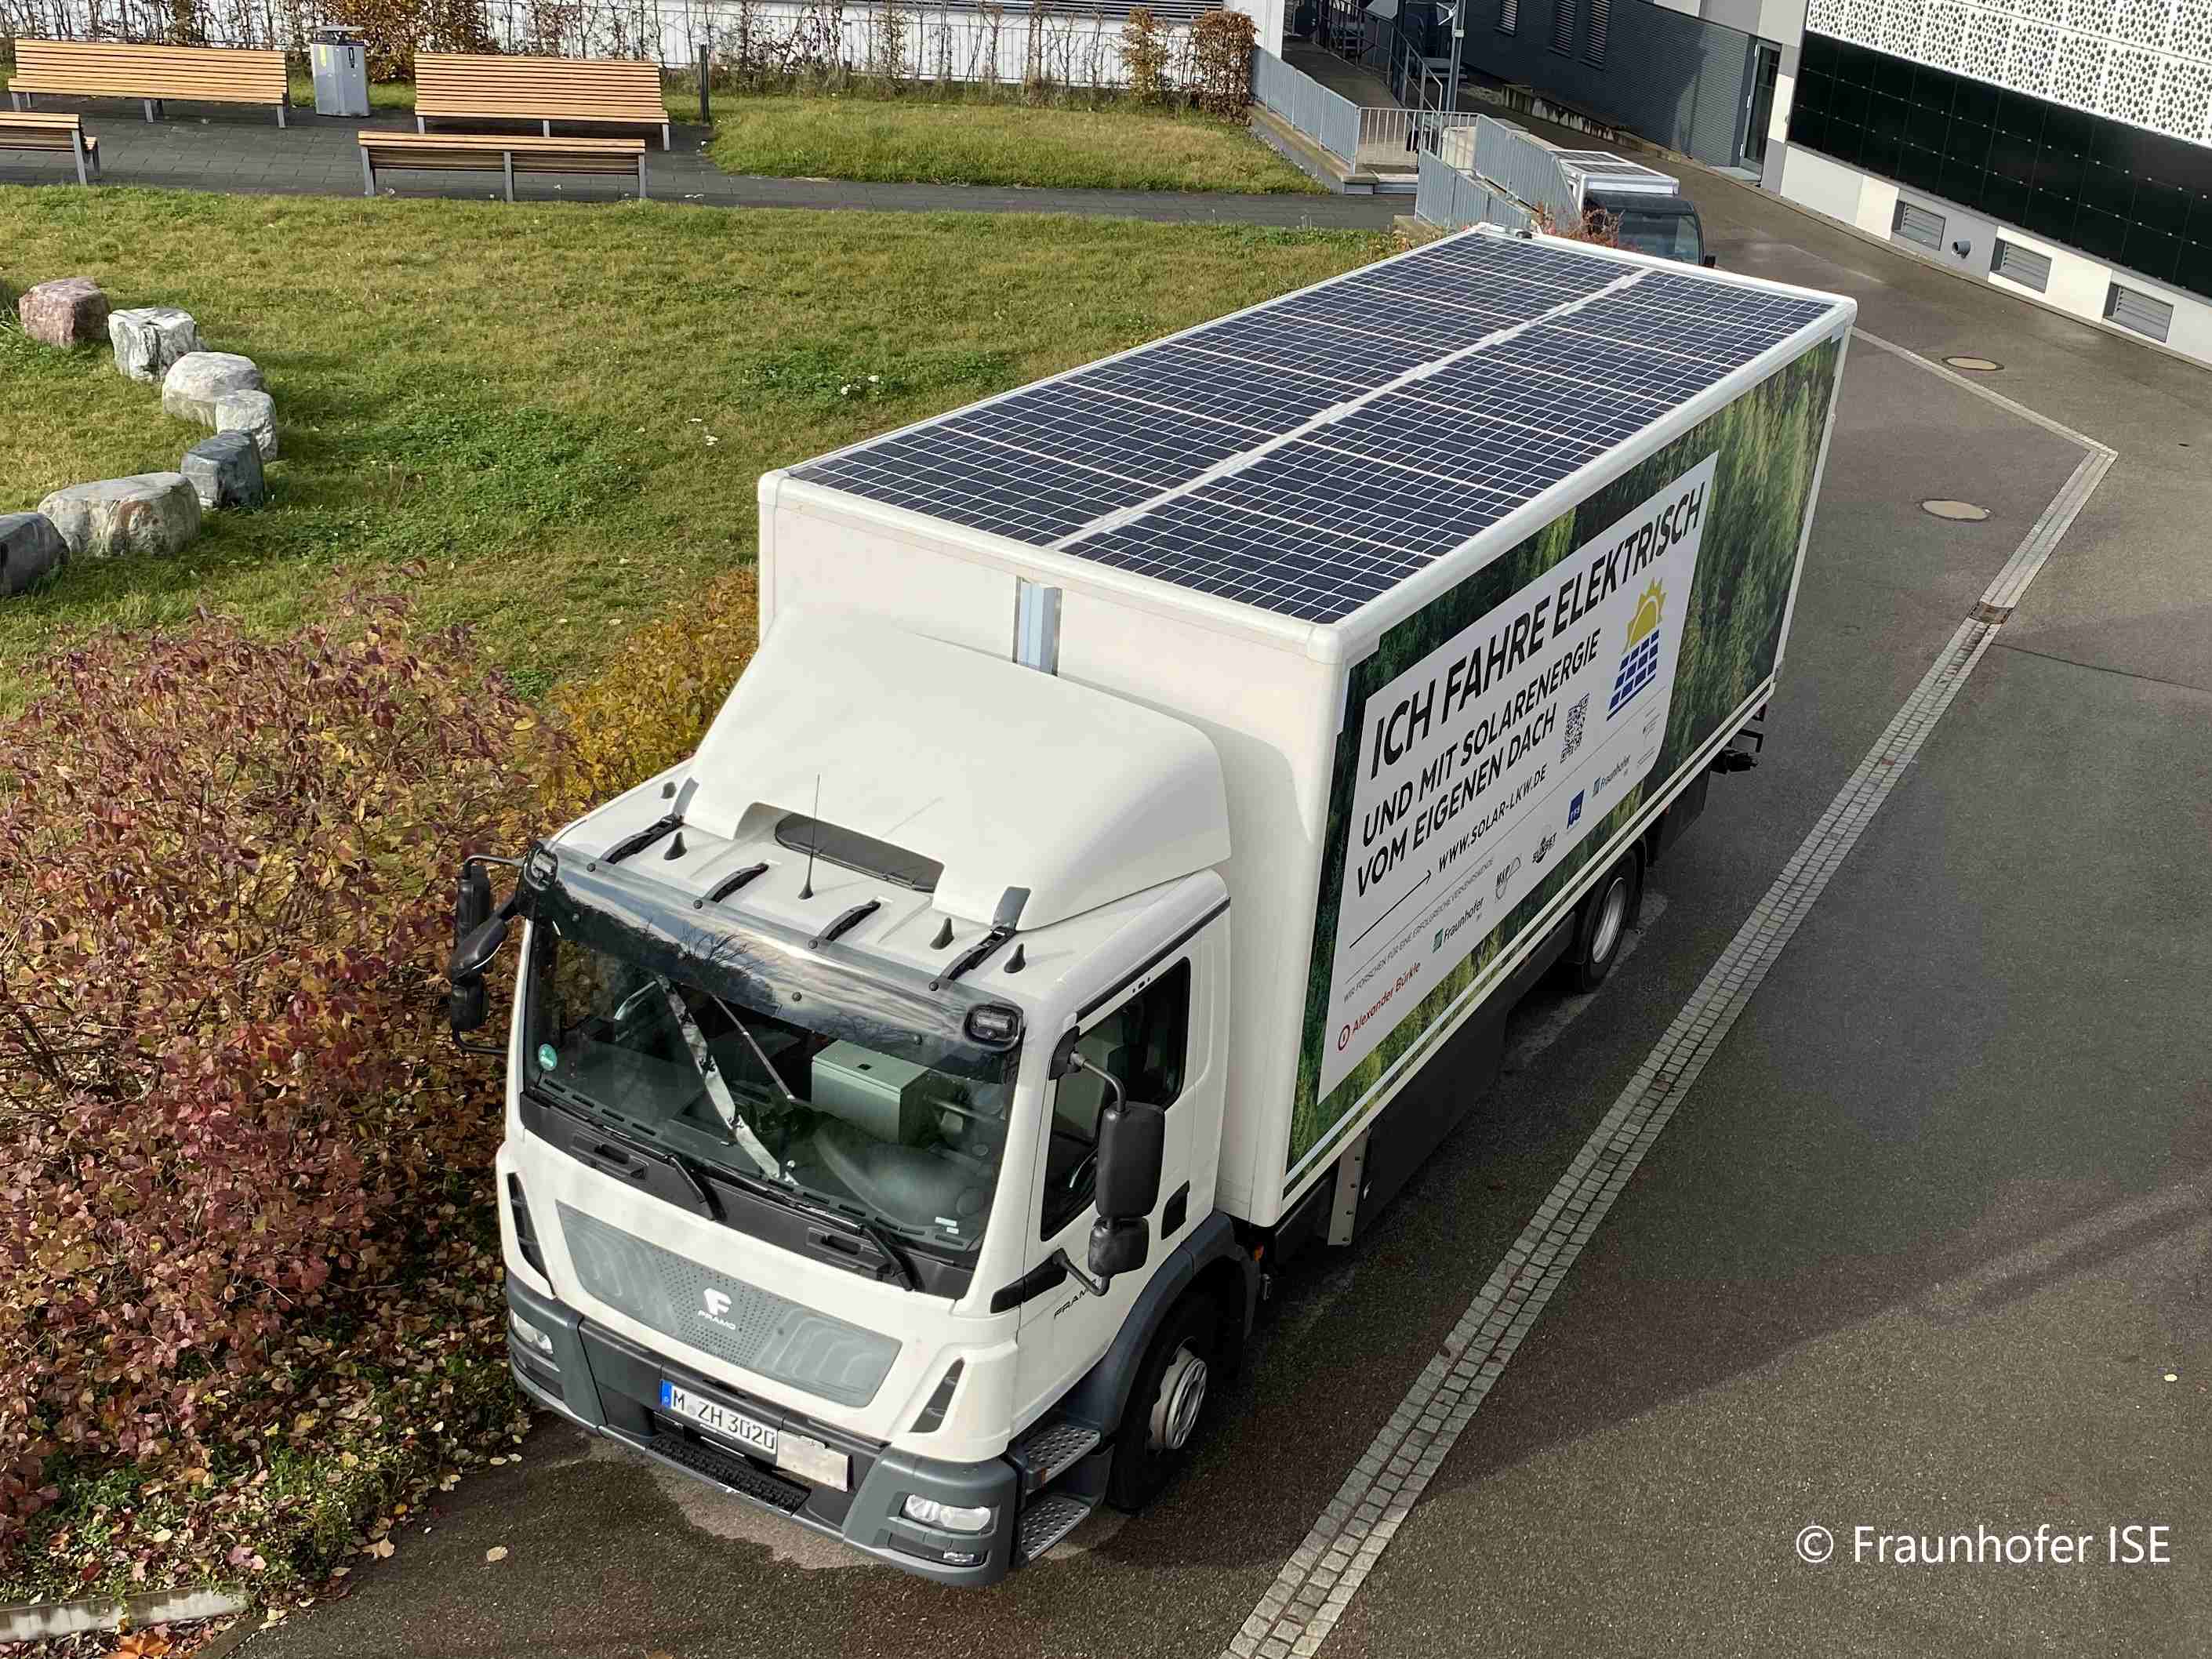 PV modules integrated into the roof of an e-truck.